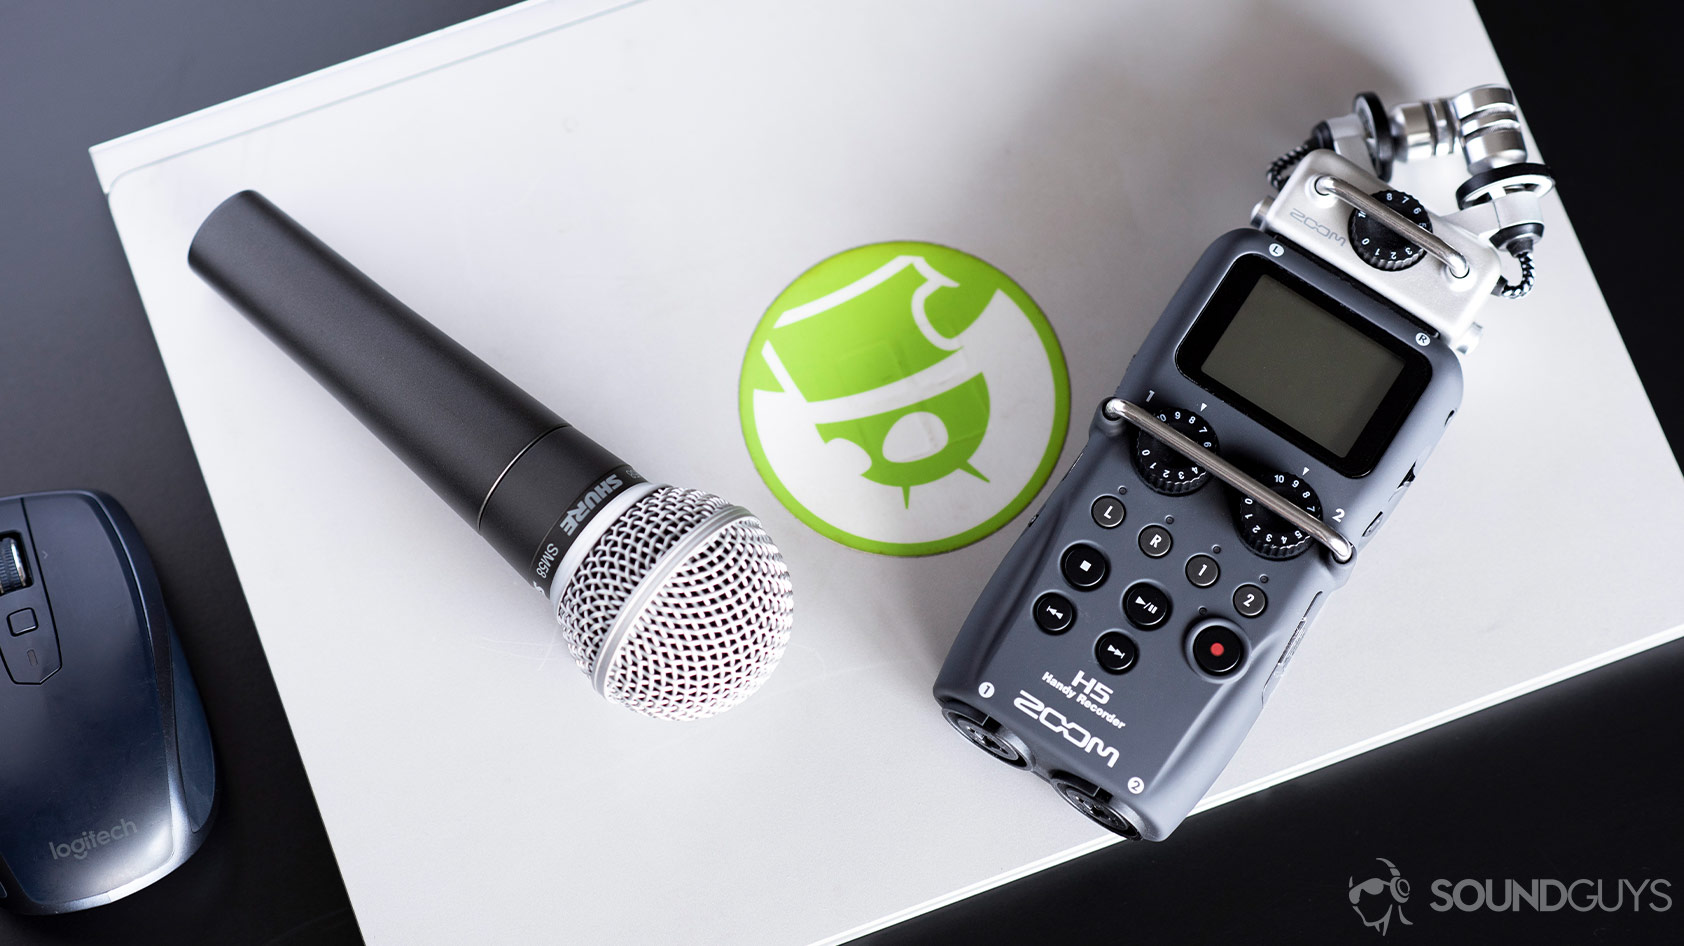 A field recording guide - SoundGuys